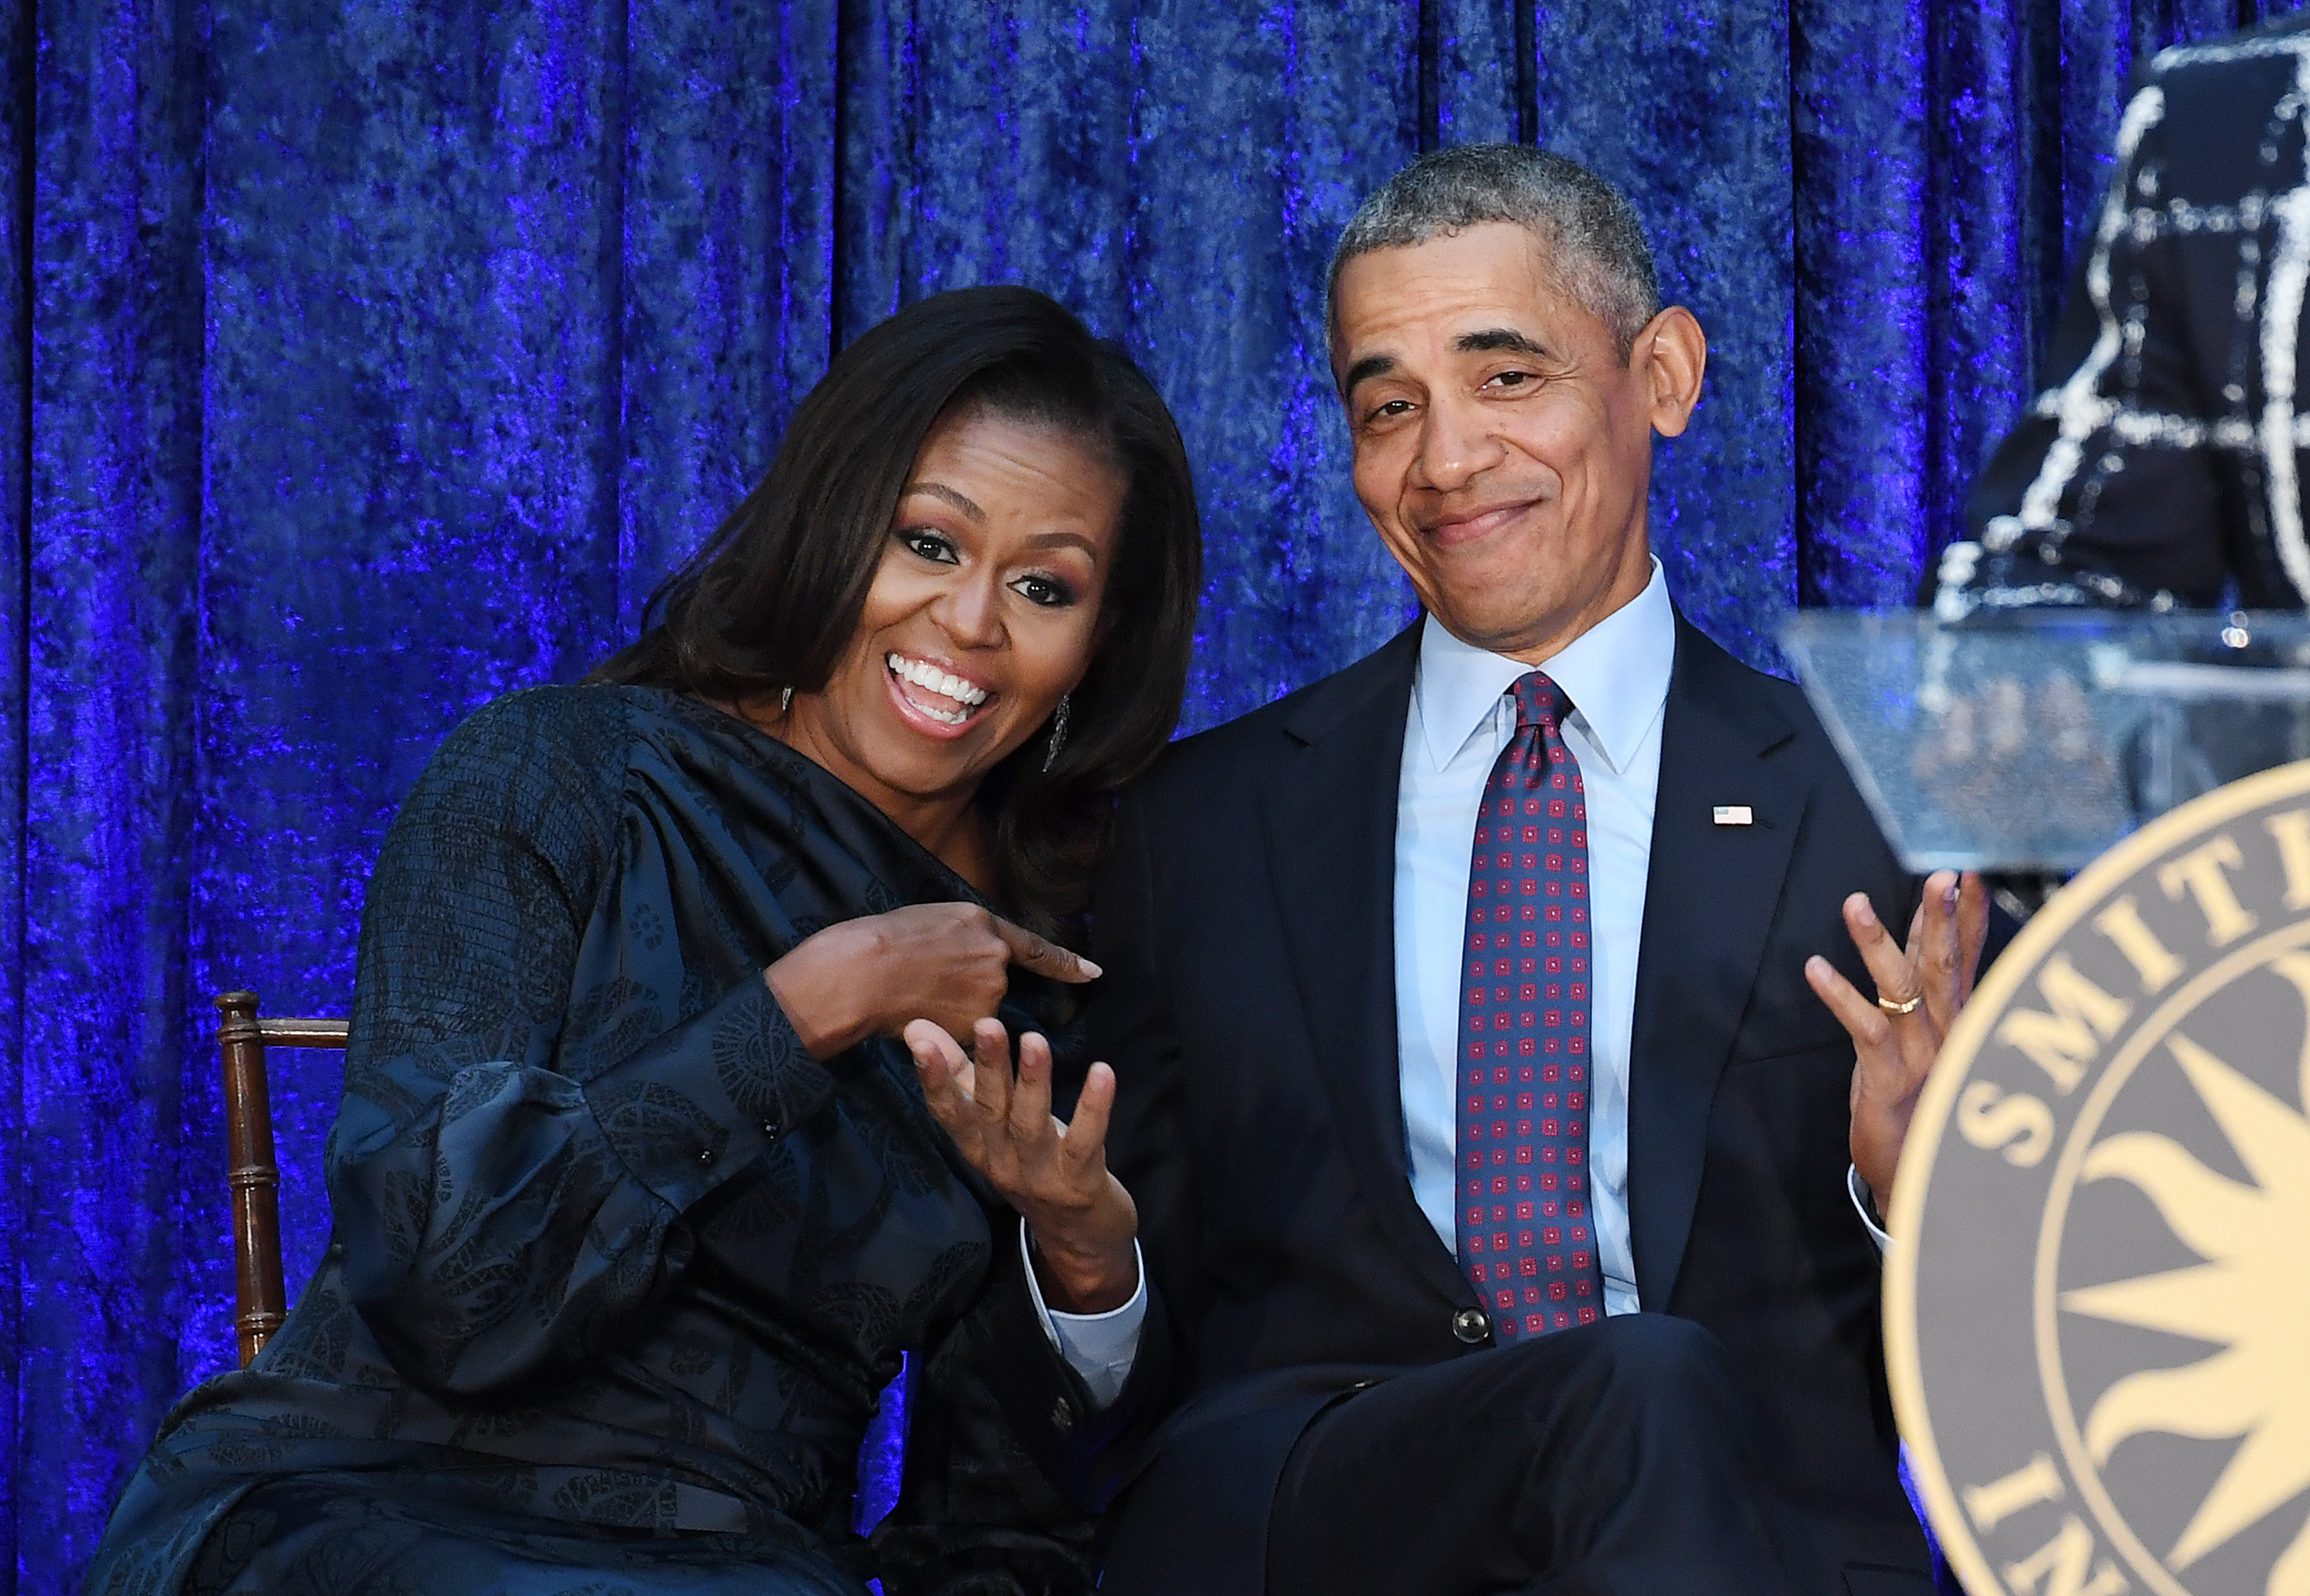 Michelle and Barack sitting and smiling together